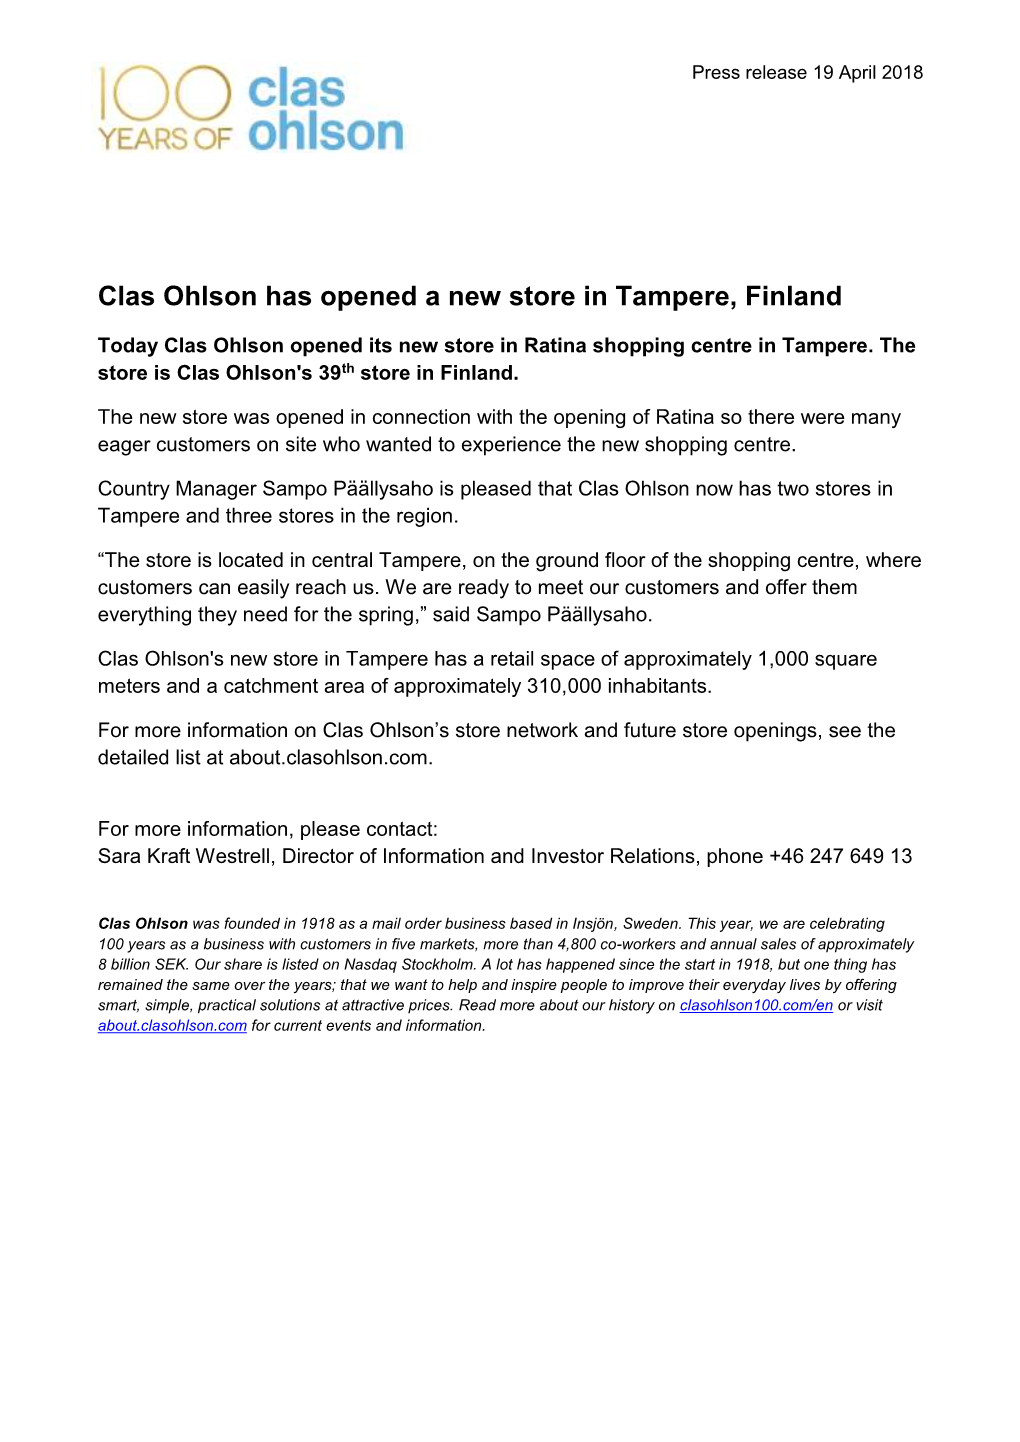 Clas Ohlson Has Opened a New Store in Tampere, Finland